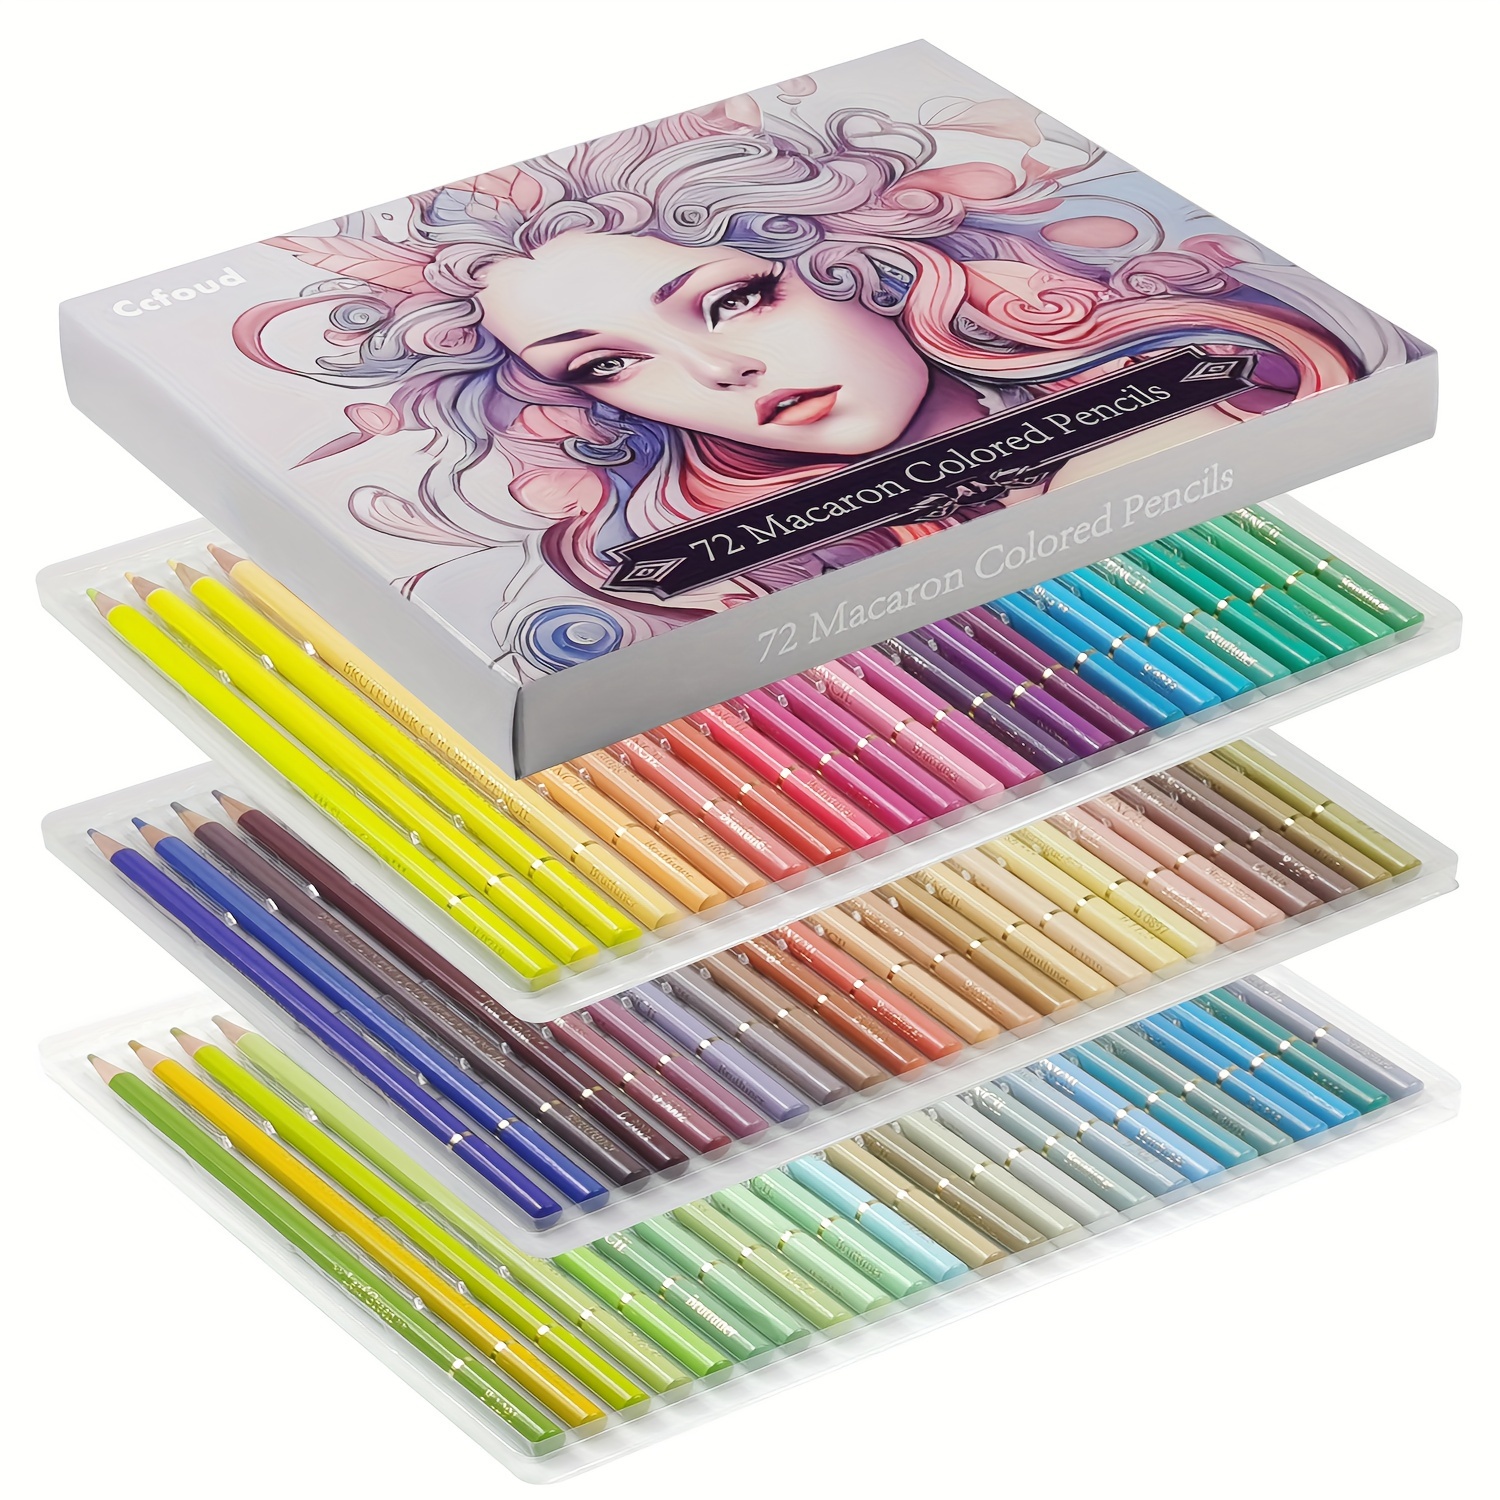 

Ccfoud Macaron Pastel Pencils, 72-color Set With Soft Core For Drawing, Sketching & Blending - Ideal For Artists And Hobbyists